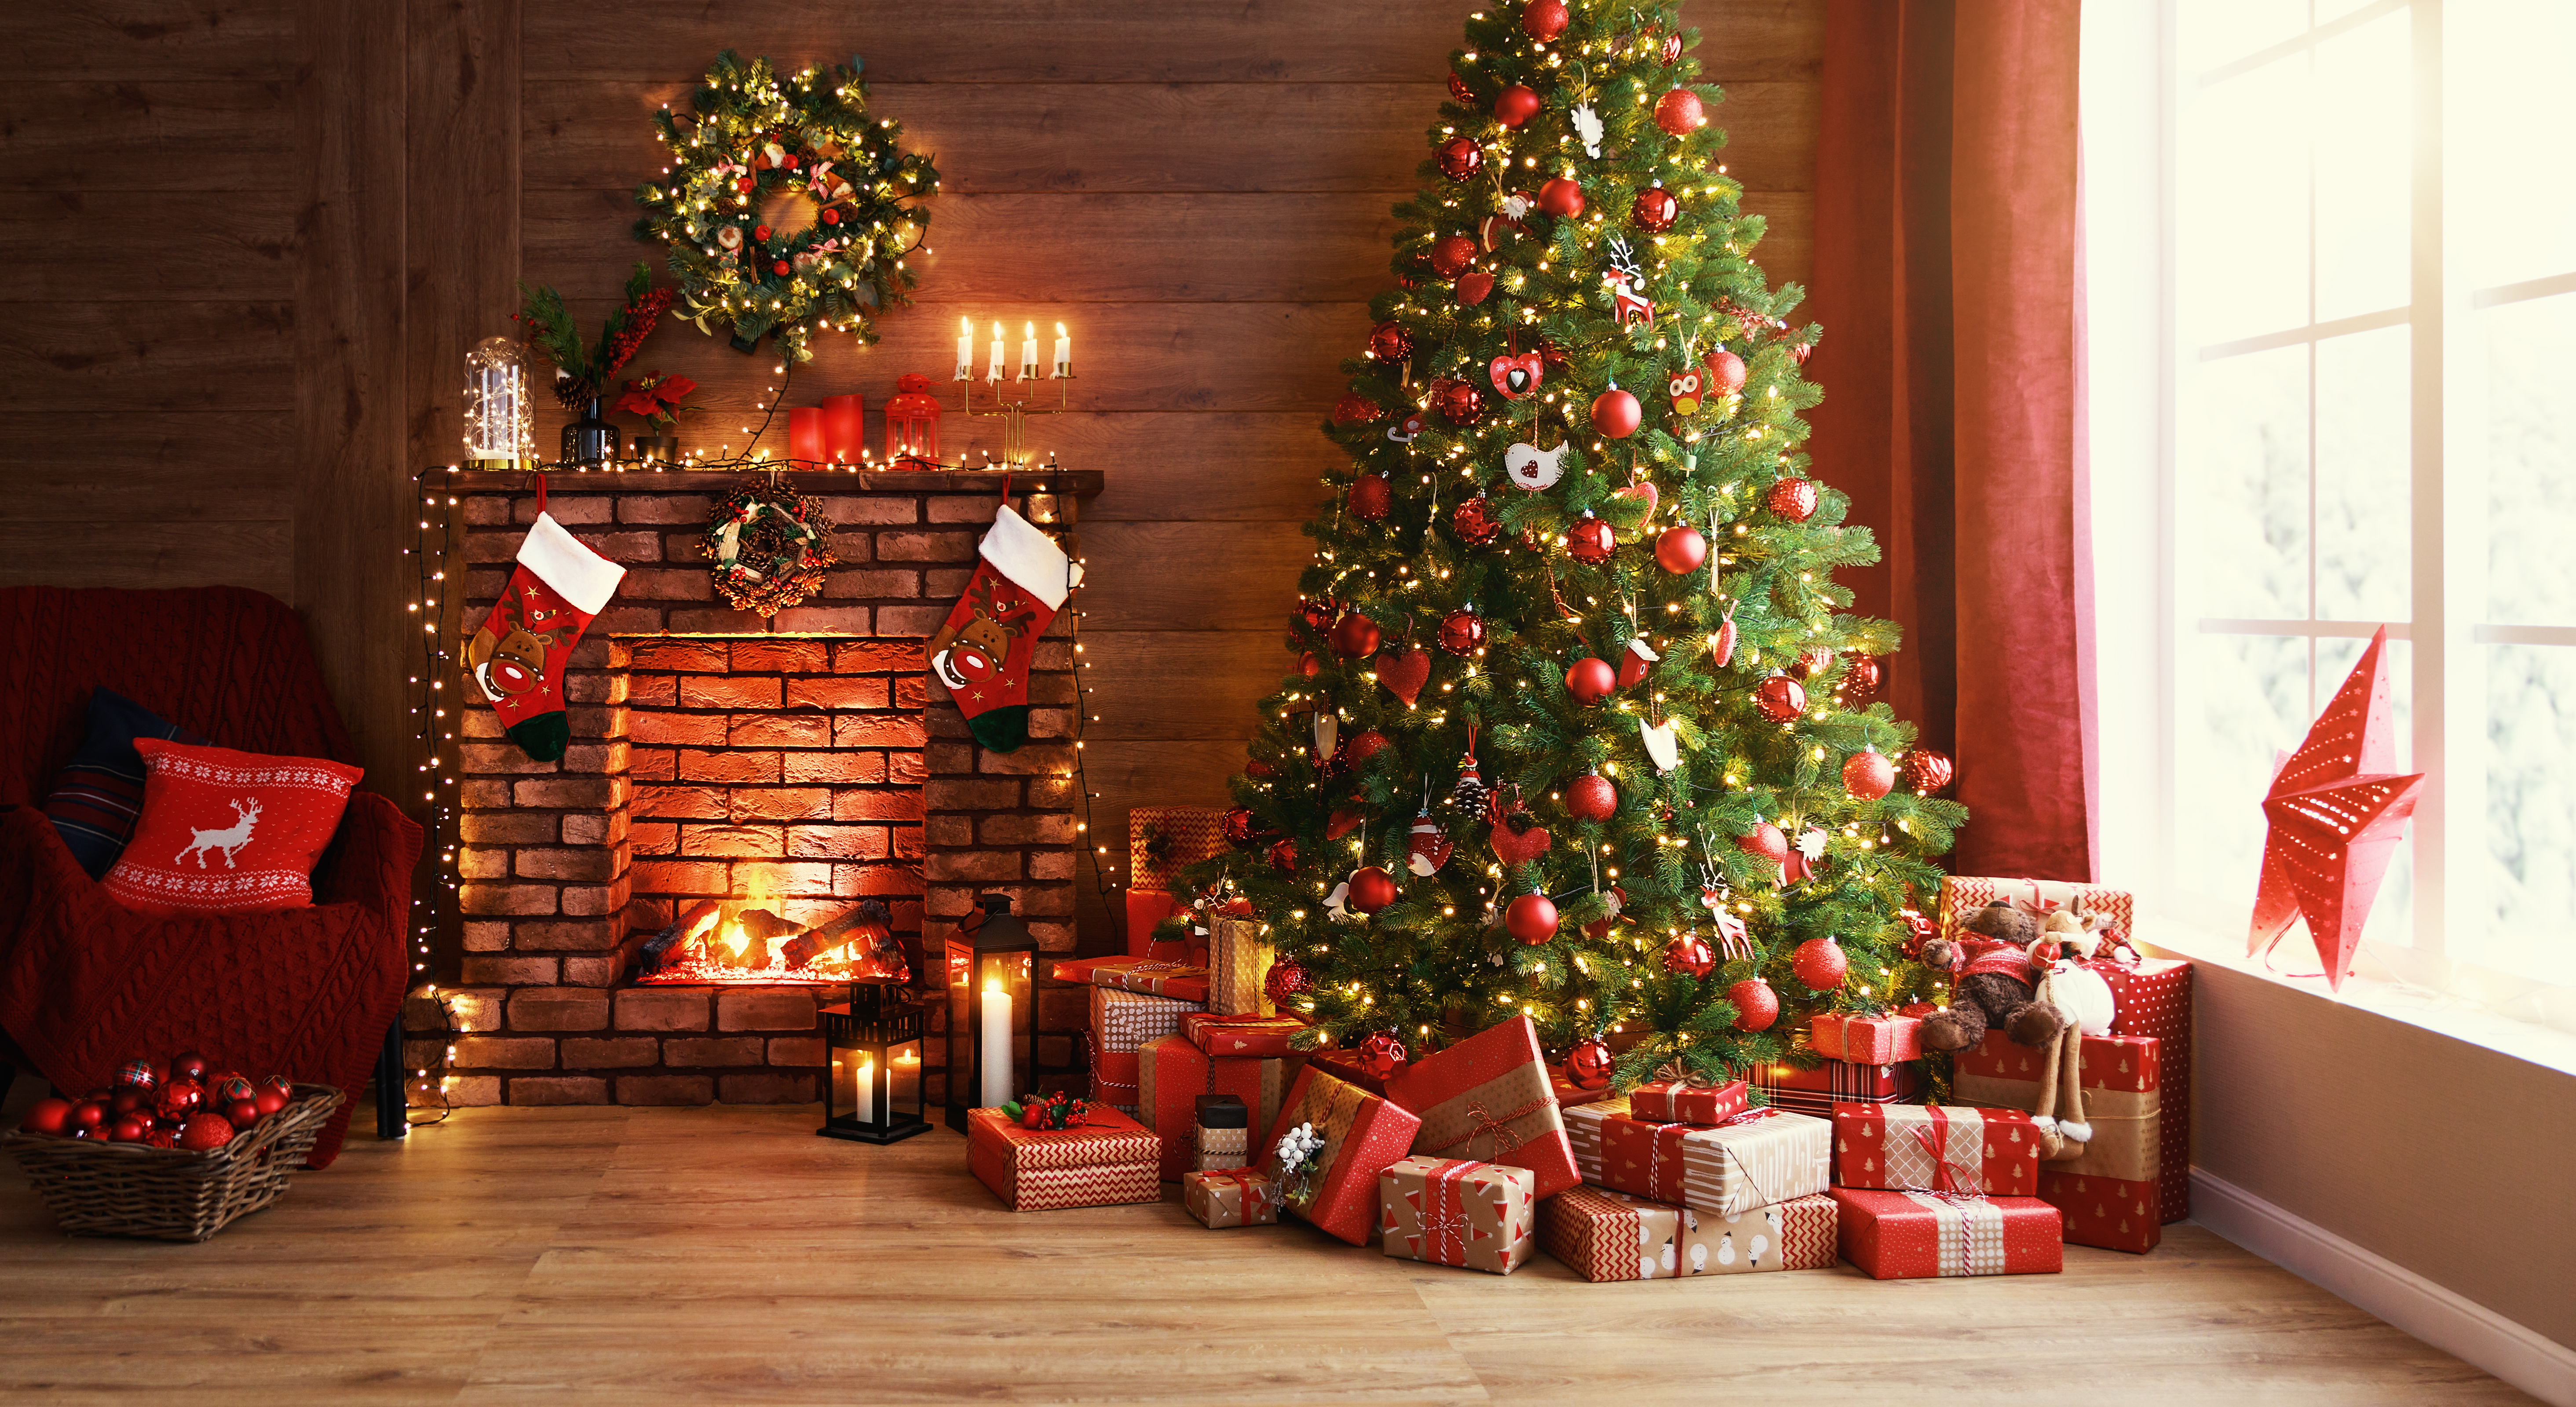 A well-decorated Christmas tree with lots of wrapped gifts under it | Source: Shutterstock